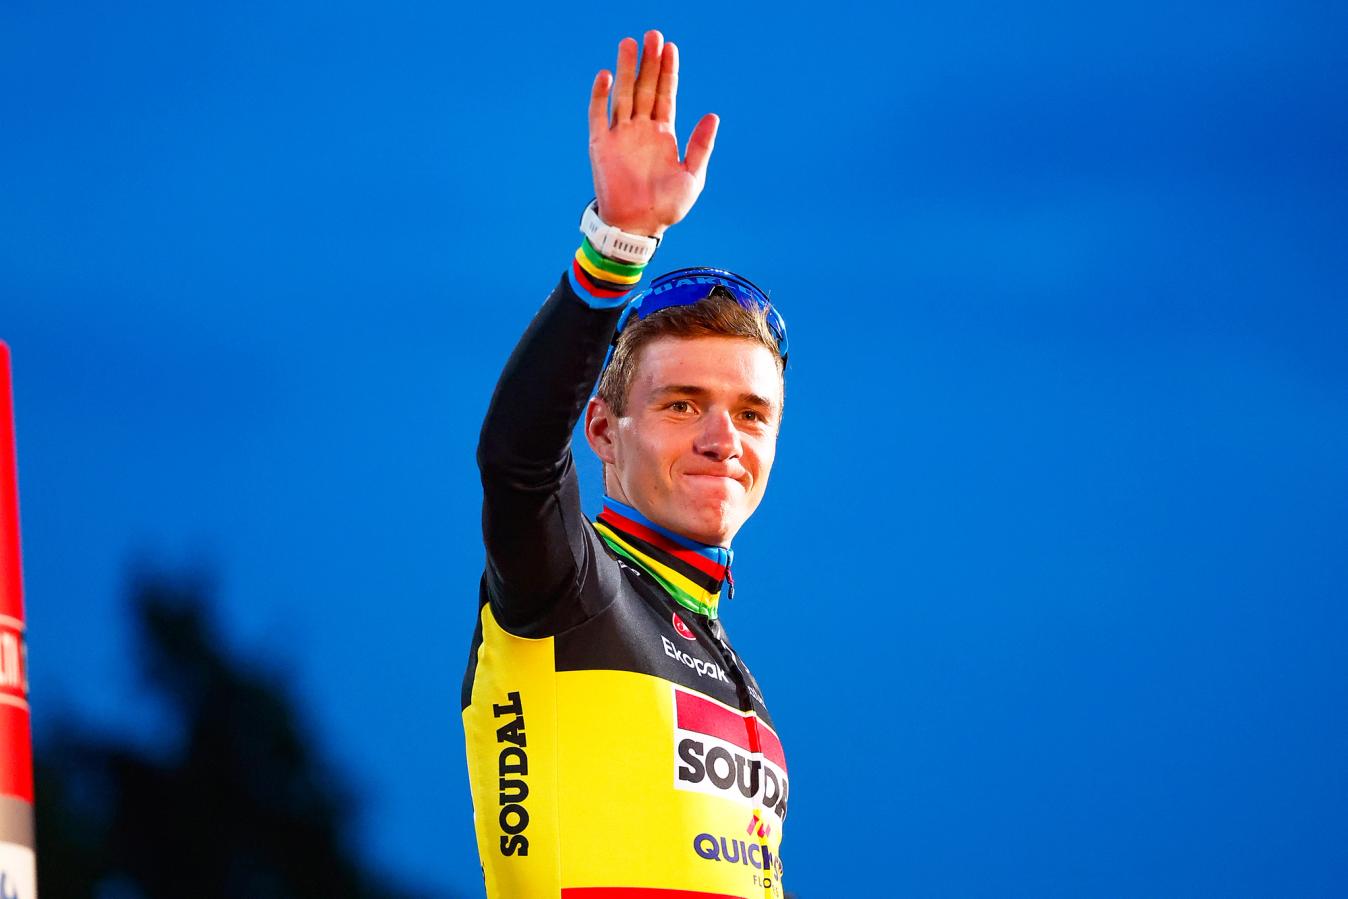 Remco Evenepoel will be hoping to become the first Belgian winner of the Tour de France since Lucien Van Impe in 1976